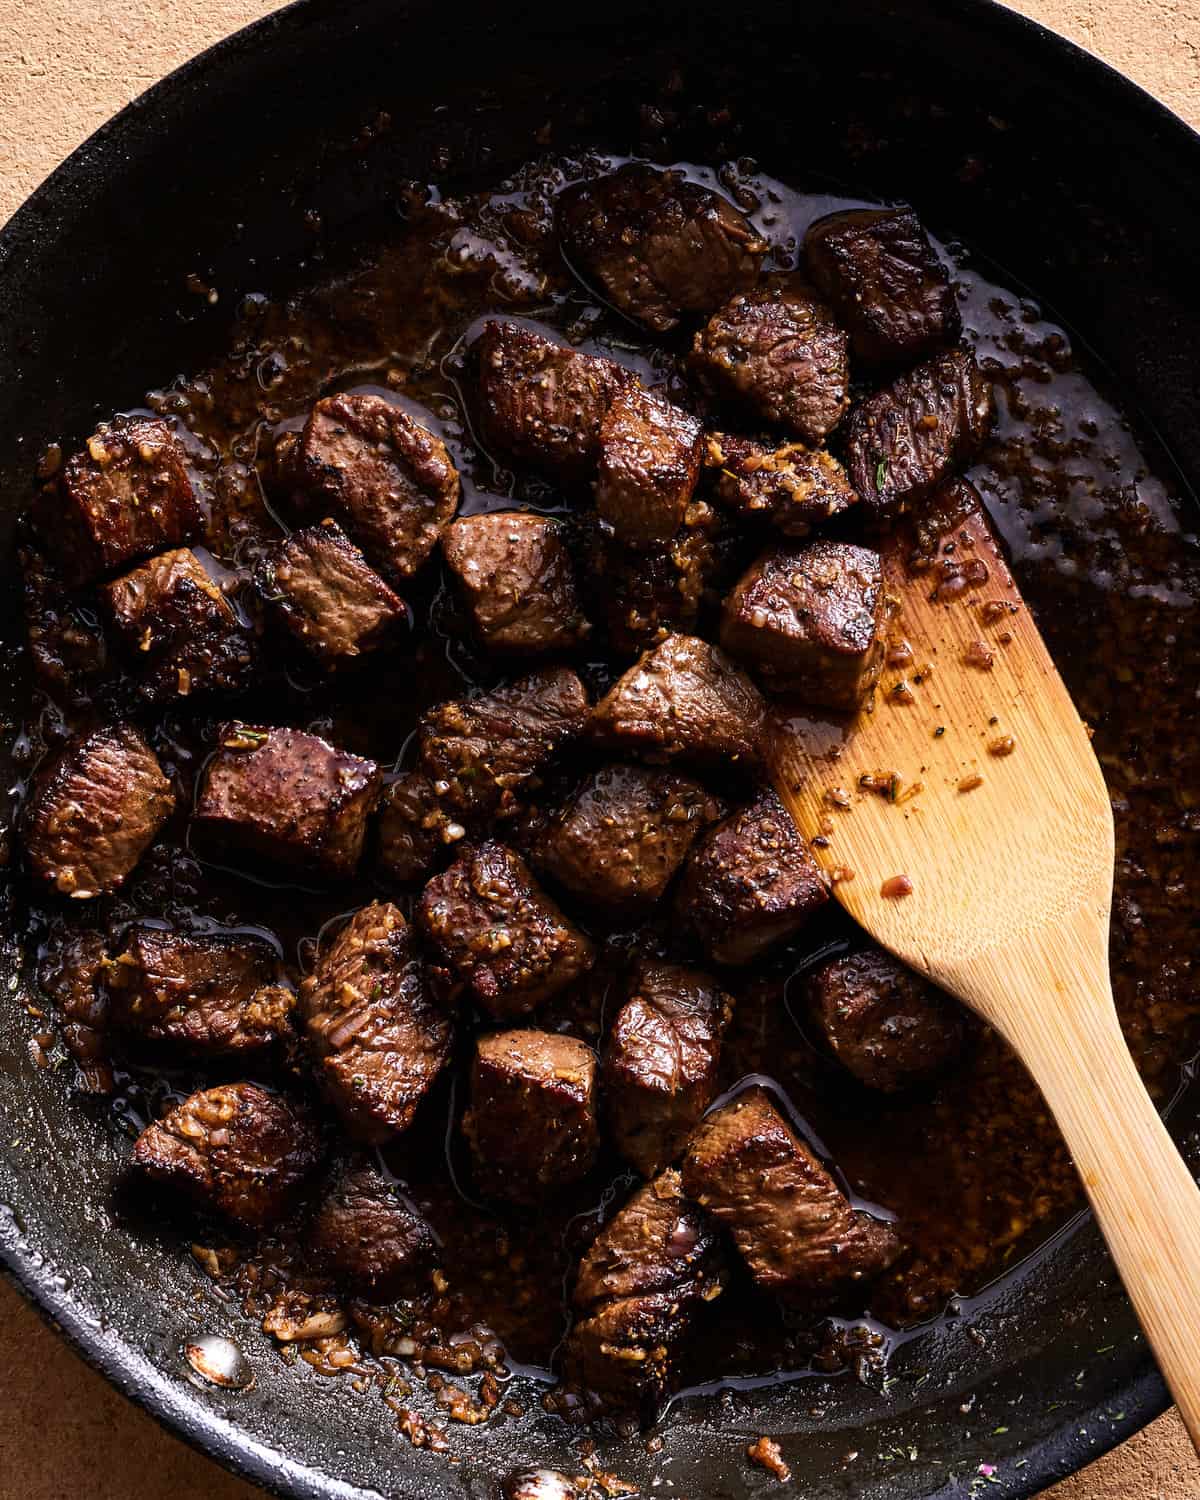 Garlic Butter Steak Bites in a cast iron skillet with a wooden spoon on a wooden countertop.